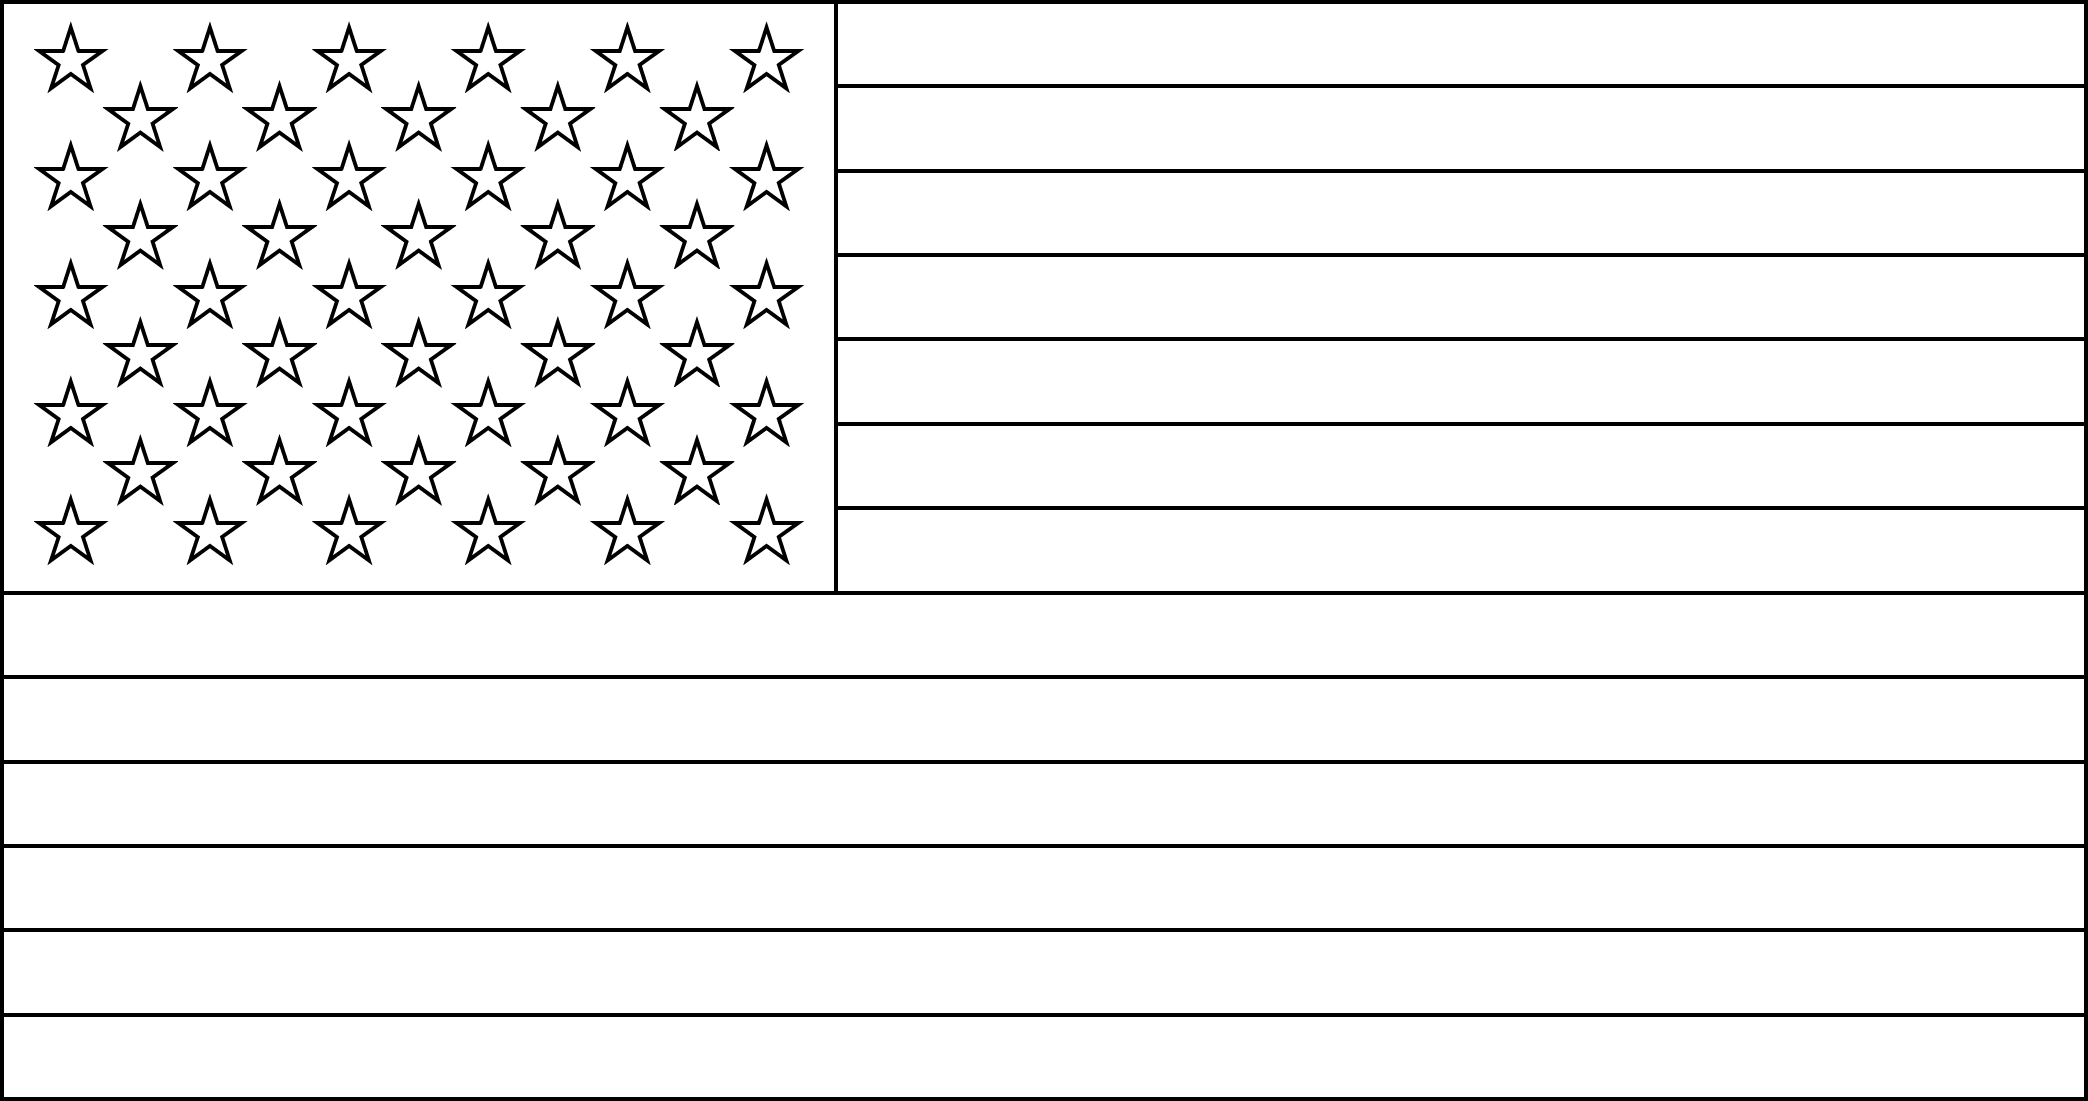 American flag clipart black and white WikiClipArt